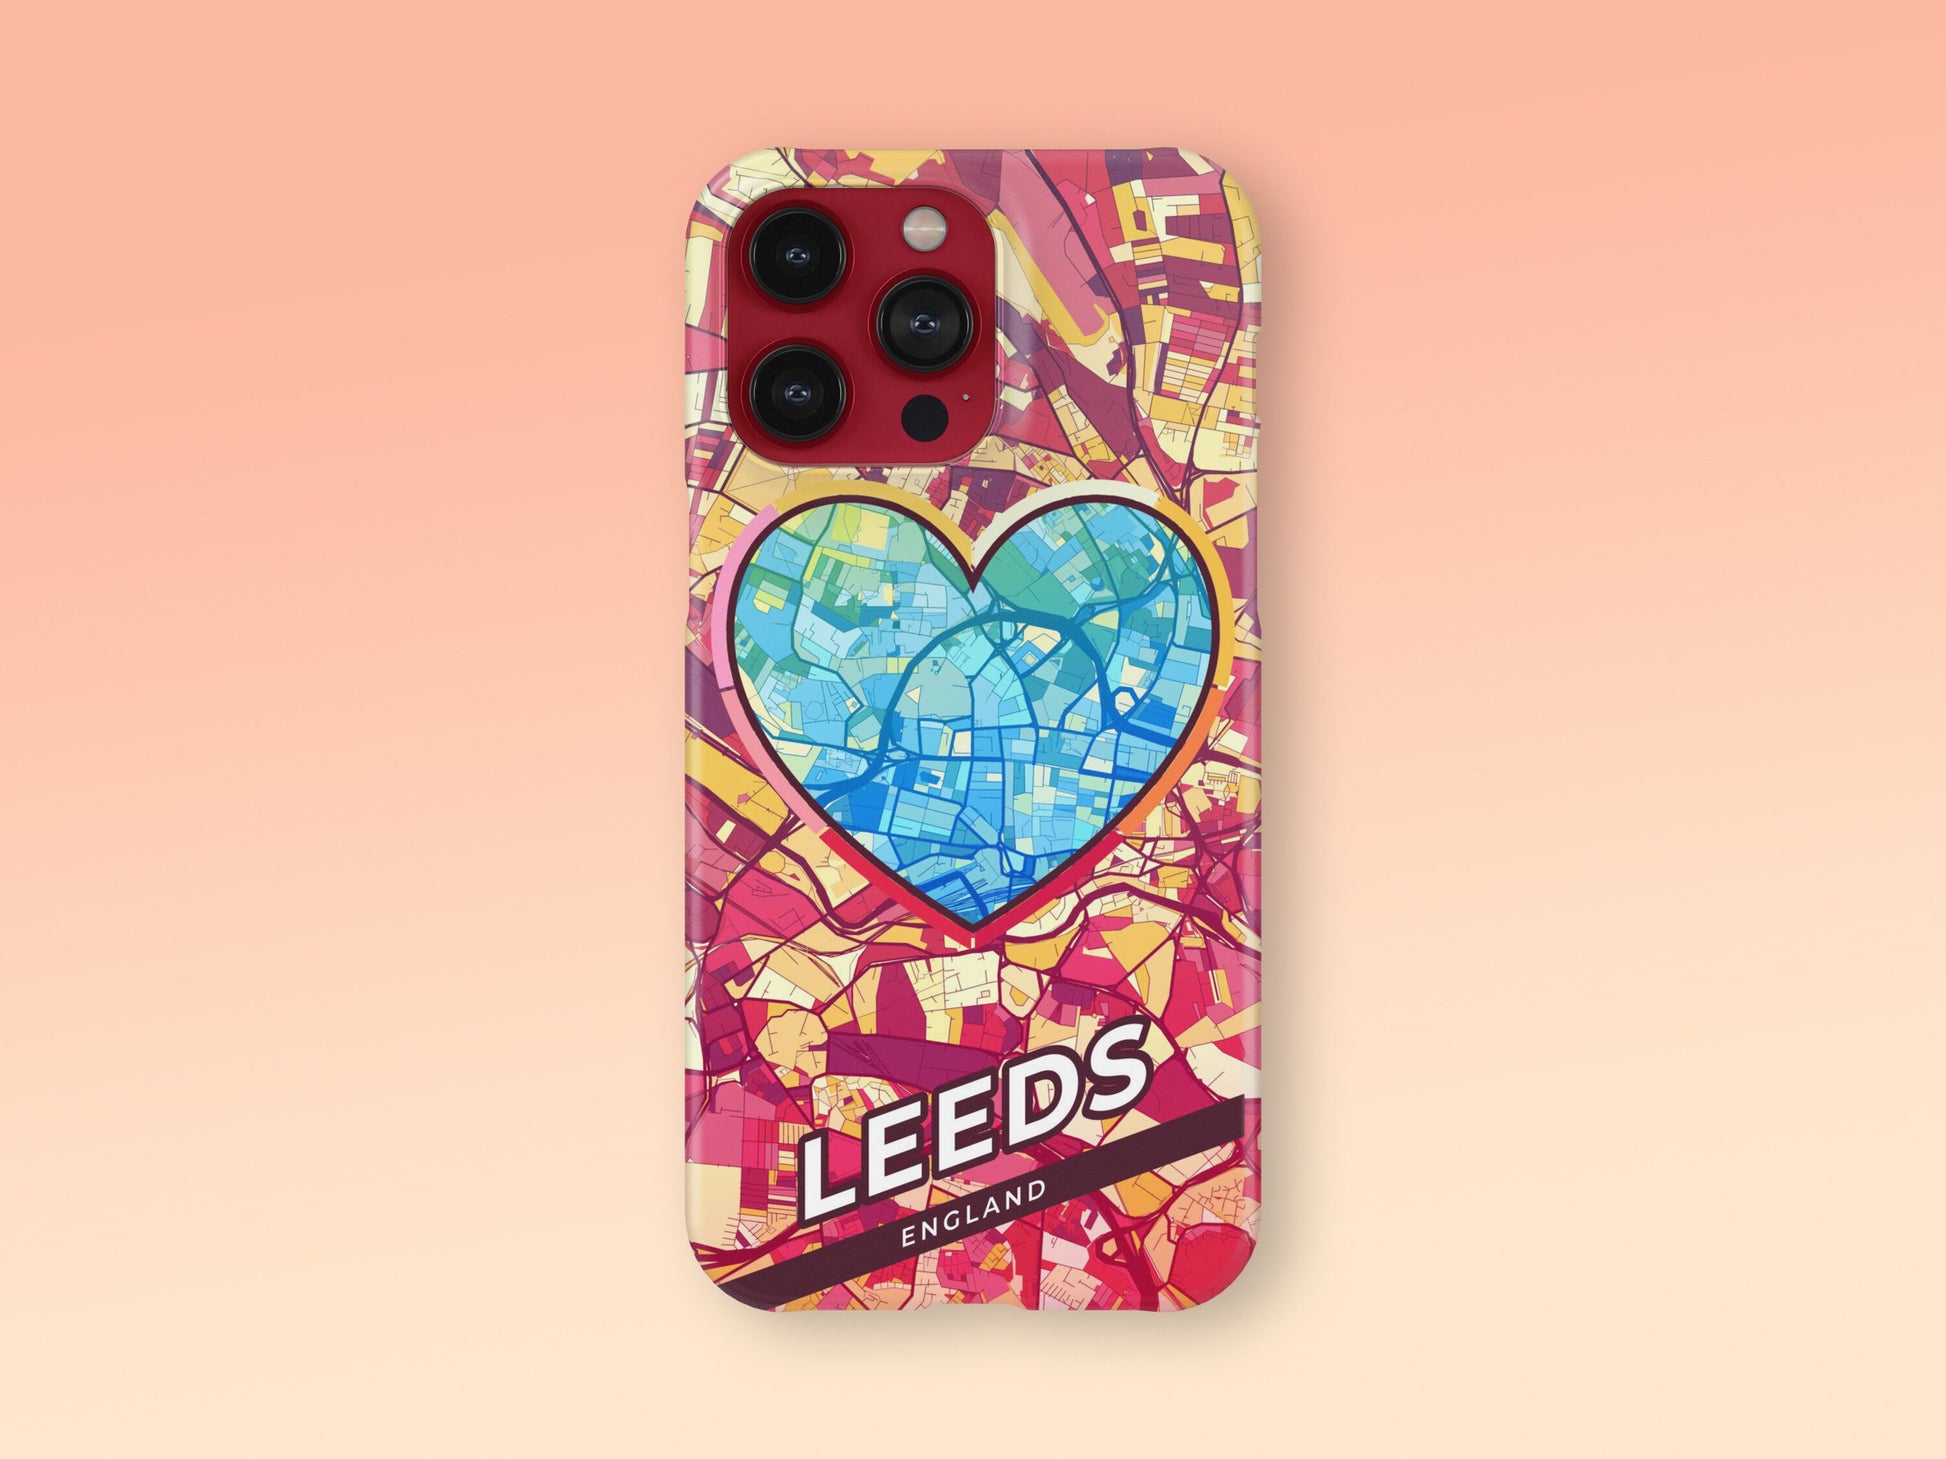 Leeds England slim phone case with colorful icon. Birthday, wedding or housewarming gift. Couple match cases. 2